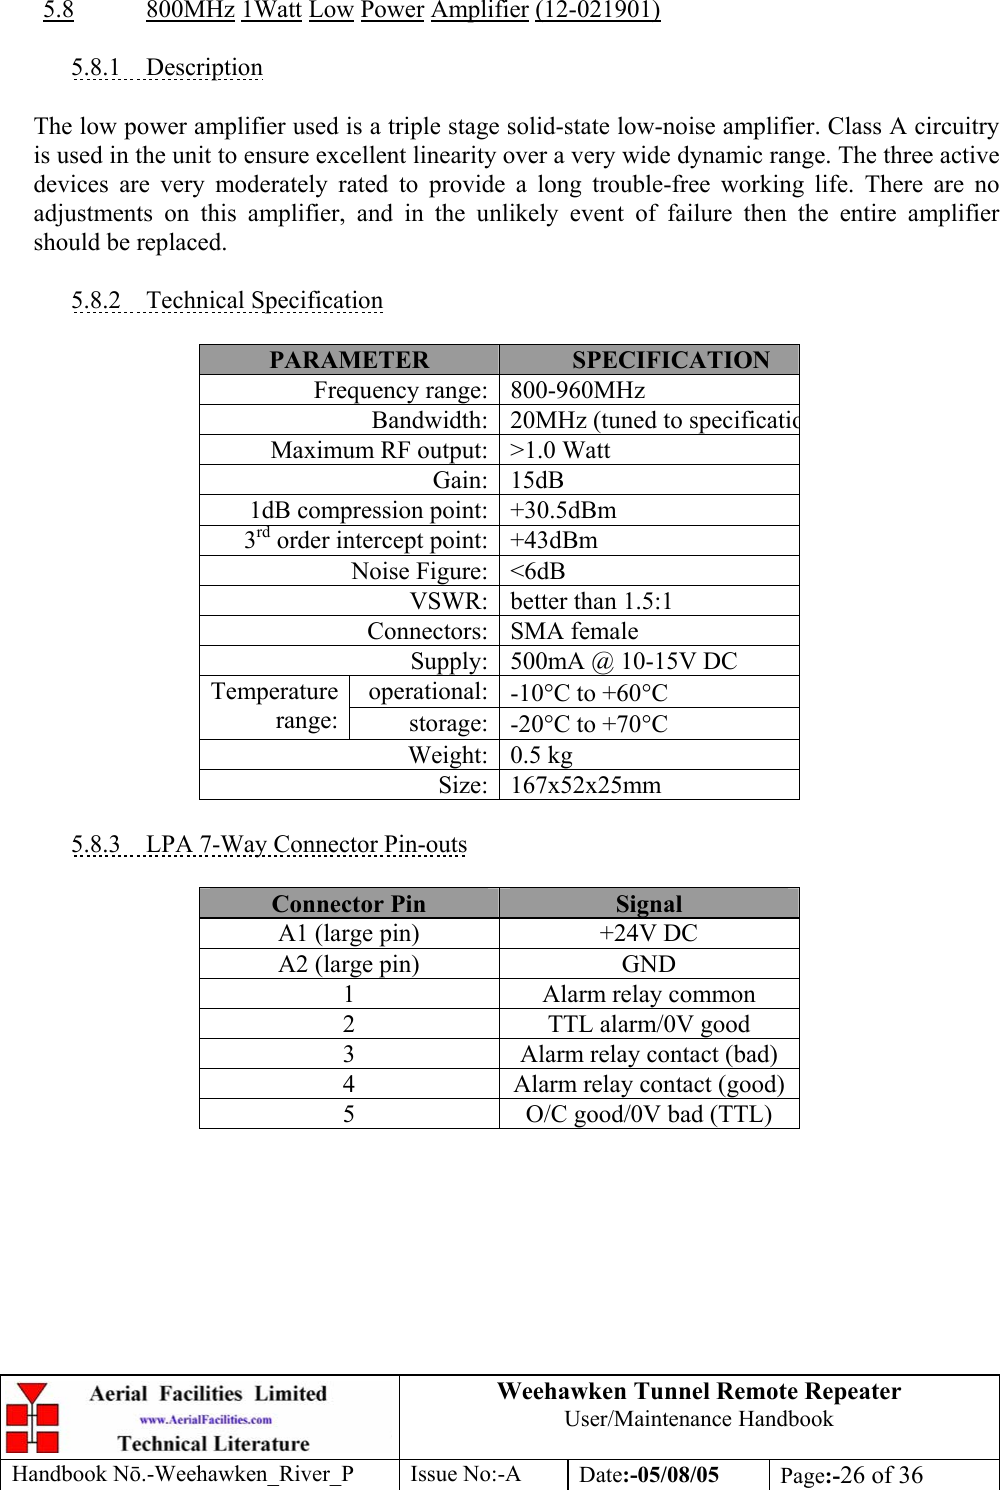 Weehawken Tunnel Remote Repeater User/Maintenance Handbook Handbook Nō.-Weehawken_River_P Issue No:-A Date:-05/08/05  Page:-26 of 36   5.8 800MHz 1Watt Low Power Amplifier (12-021901)  5.8.1 Description  The low power amplifier used is a triple stage solid-state low-noise amplifier. Class A circuitry is used in the unit to ensure excellent linearity over a very wide dynamic range. The three active devices are very moderately rated to provide a long trouble-free working life. There are no adjustments on this amplifier, and in the unlikely event of failure then the entire amplifier should be replaced.  5.8.2 Technical Specification  PARAMETER  SPECIFICATION Frequency range: 800-960MHz Bandwidth: 20MHz (tuned to specificatioMaximum RF output: &gt;1.0 Watt Gain: 15dB 1dB compression point: +30.5dBm 3rd order intercept point: +43dBm Noise Figure: &lt;6dB VSWR: better than 1.5:1 Connectors: SMA female Supply: 500mA @ 10-15V DC operational: -10°C to +60°C Temperature range:  storage: -20°C to +70°C Weight: 0.5 kg Size: 167x52x25mm  5.8.3  LPA 7-Way Connector Pin-outs  Connector Pin  Signal A1 (large pin)  +24V DC A2 (large pin)  GND 1  Alarm relay common 2  TTL alarm/0V good 3  Alarm relay contact (bad) 4  Alarm relay contact (good) 5  O/C good/0V bad (TTL)  